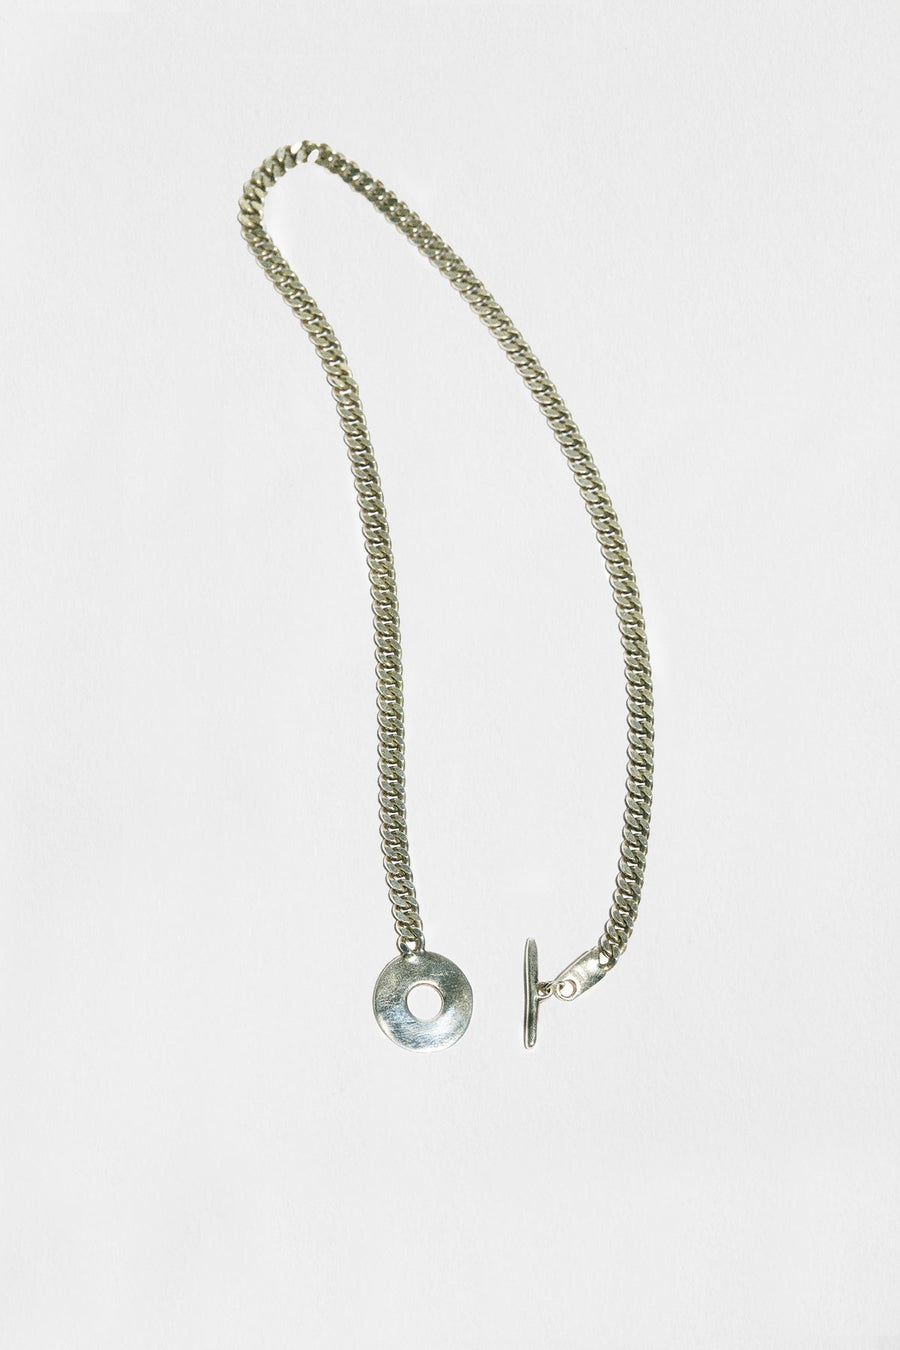 Hernan Herdez- La Cubana necklace-Jewellery-jewelry-Jeryco Store- London- Necklace-sterling silver necklace- recycled silver necklace- sustainable brand-necklaces for him- necklaces for her-necklaces that are unisex-Flat Curb chain necklace